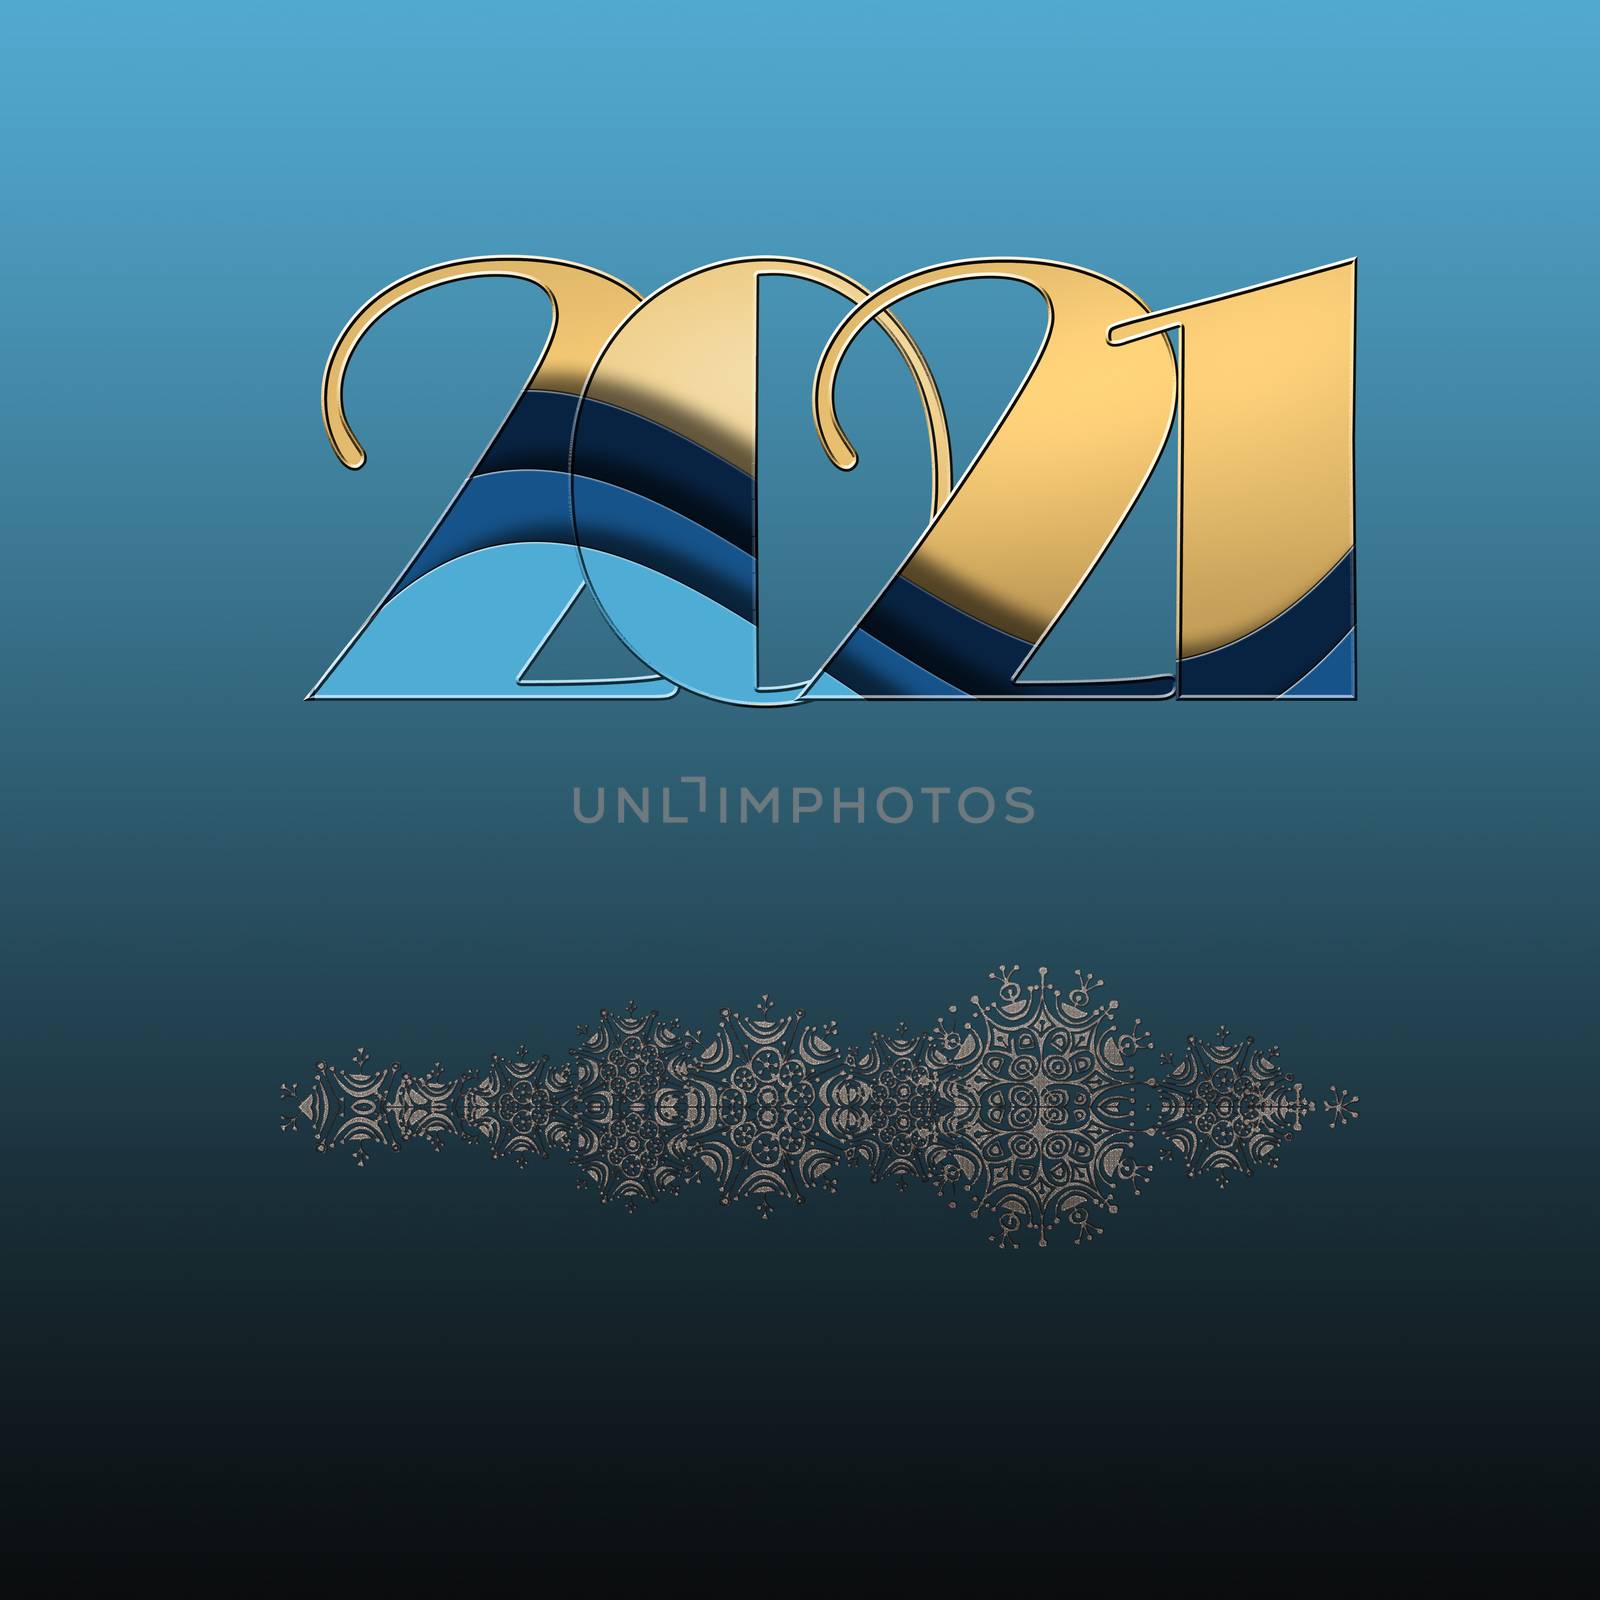 New Year party invitation in blue. 3D gold digit 2021, silver snowflakes border on blue background. 3D illustration